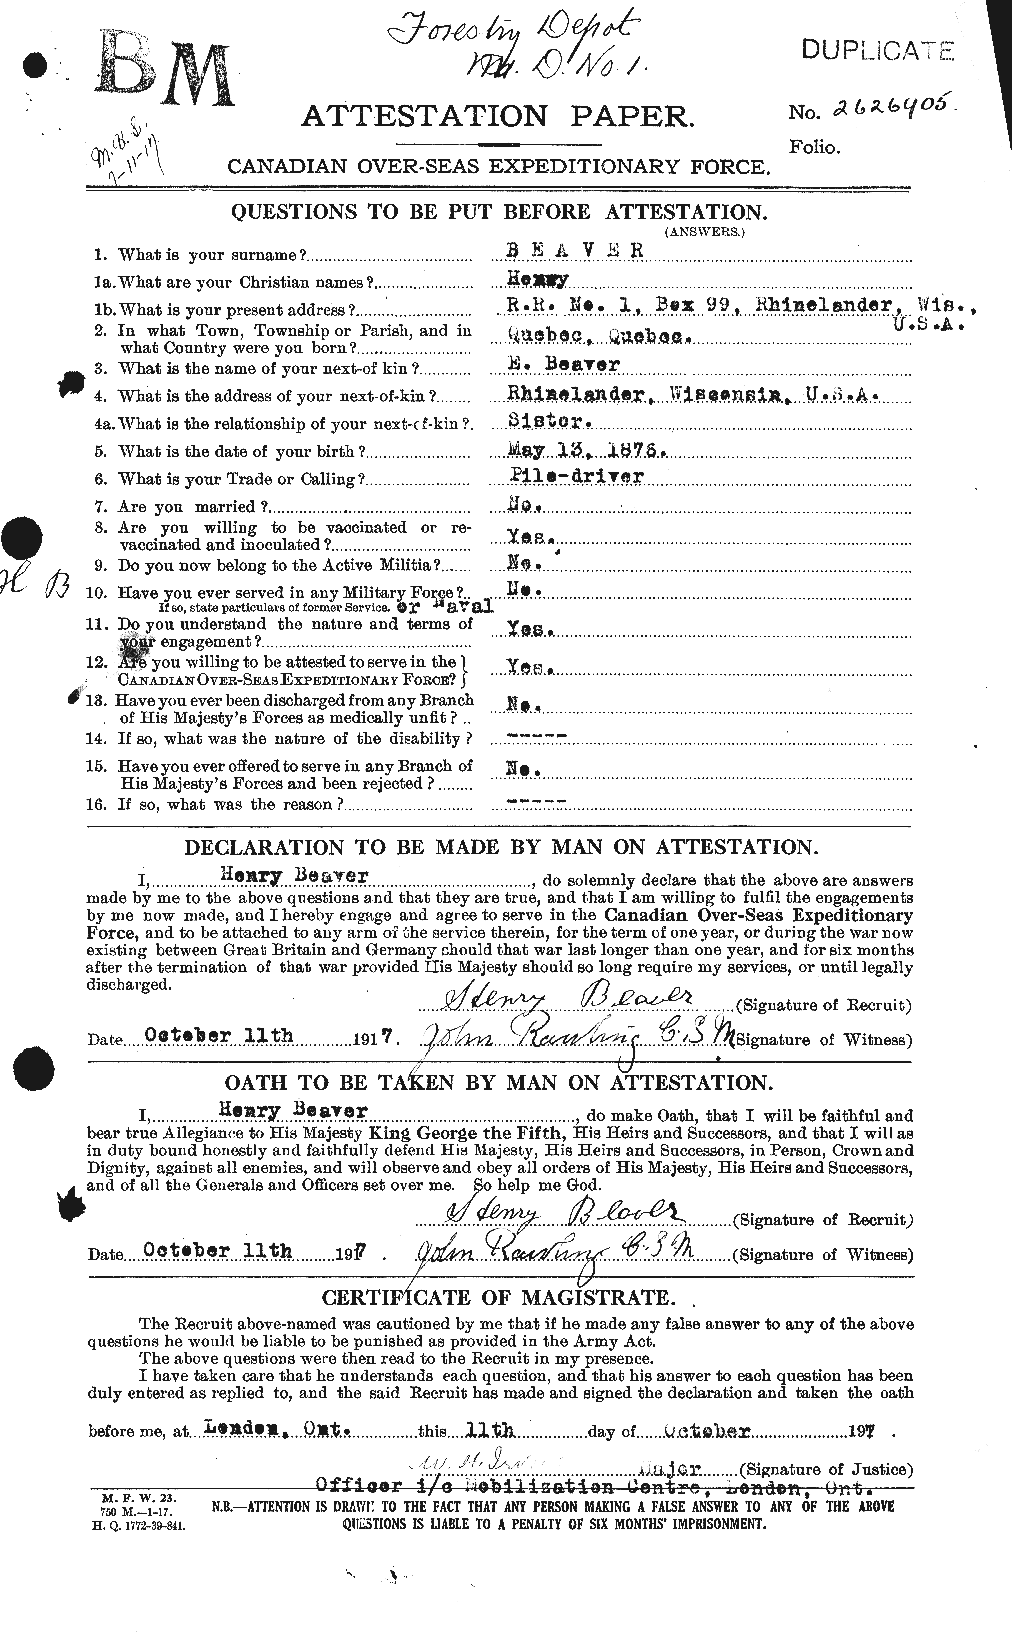 Personnel Records of the First World War - CEF 231927a